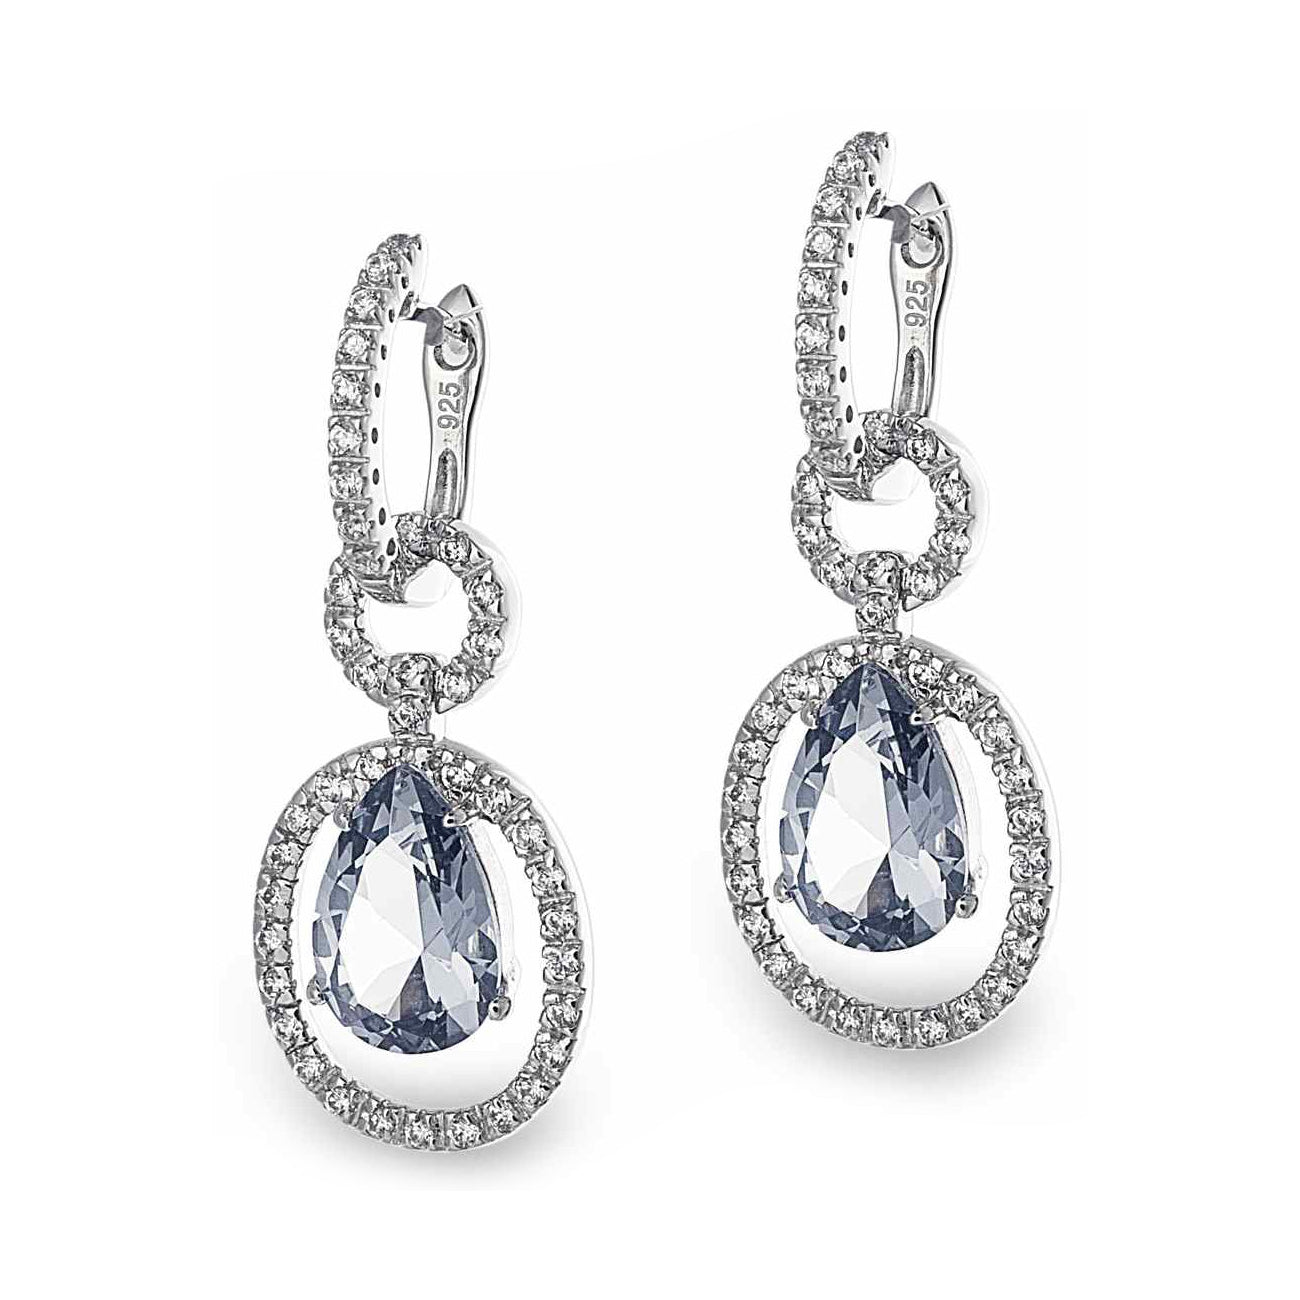 Princess Mary Earrings in 925 sterling silver with blue and clear cubic zirconia stones. Worldwide shipping. Affordable luxury jewellery by Bellagio & Co.